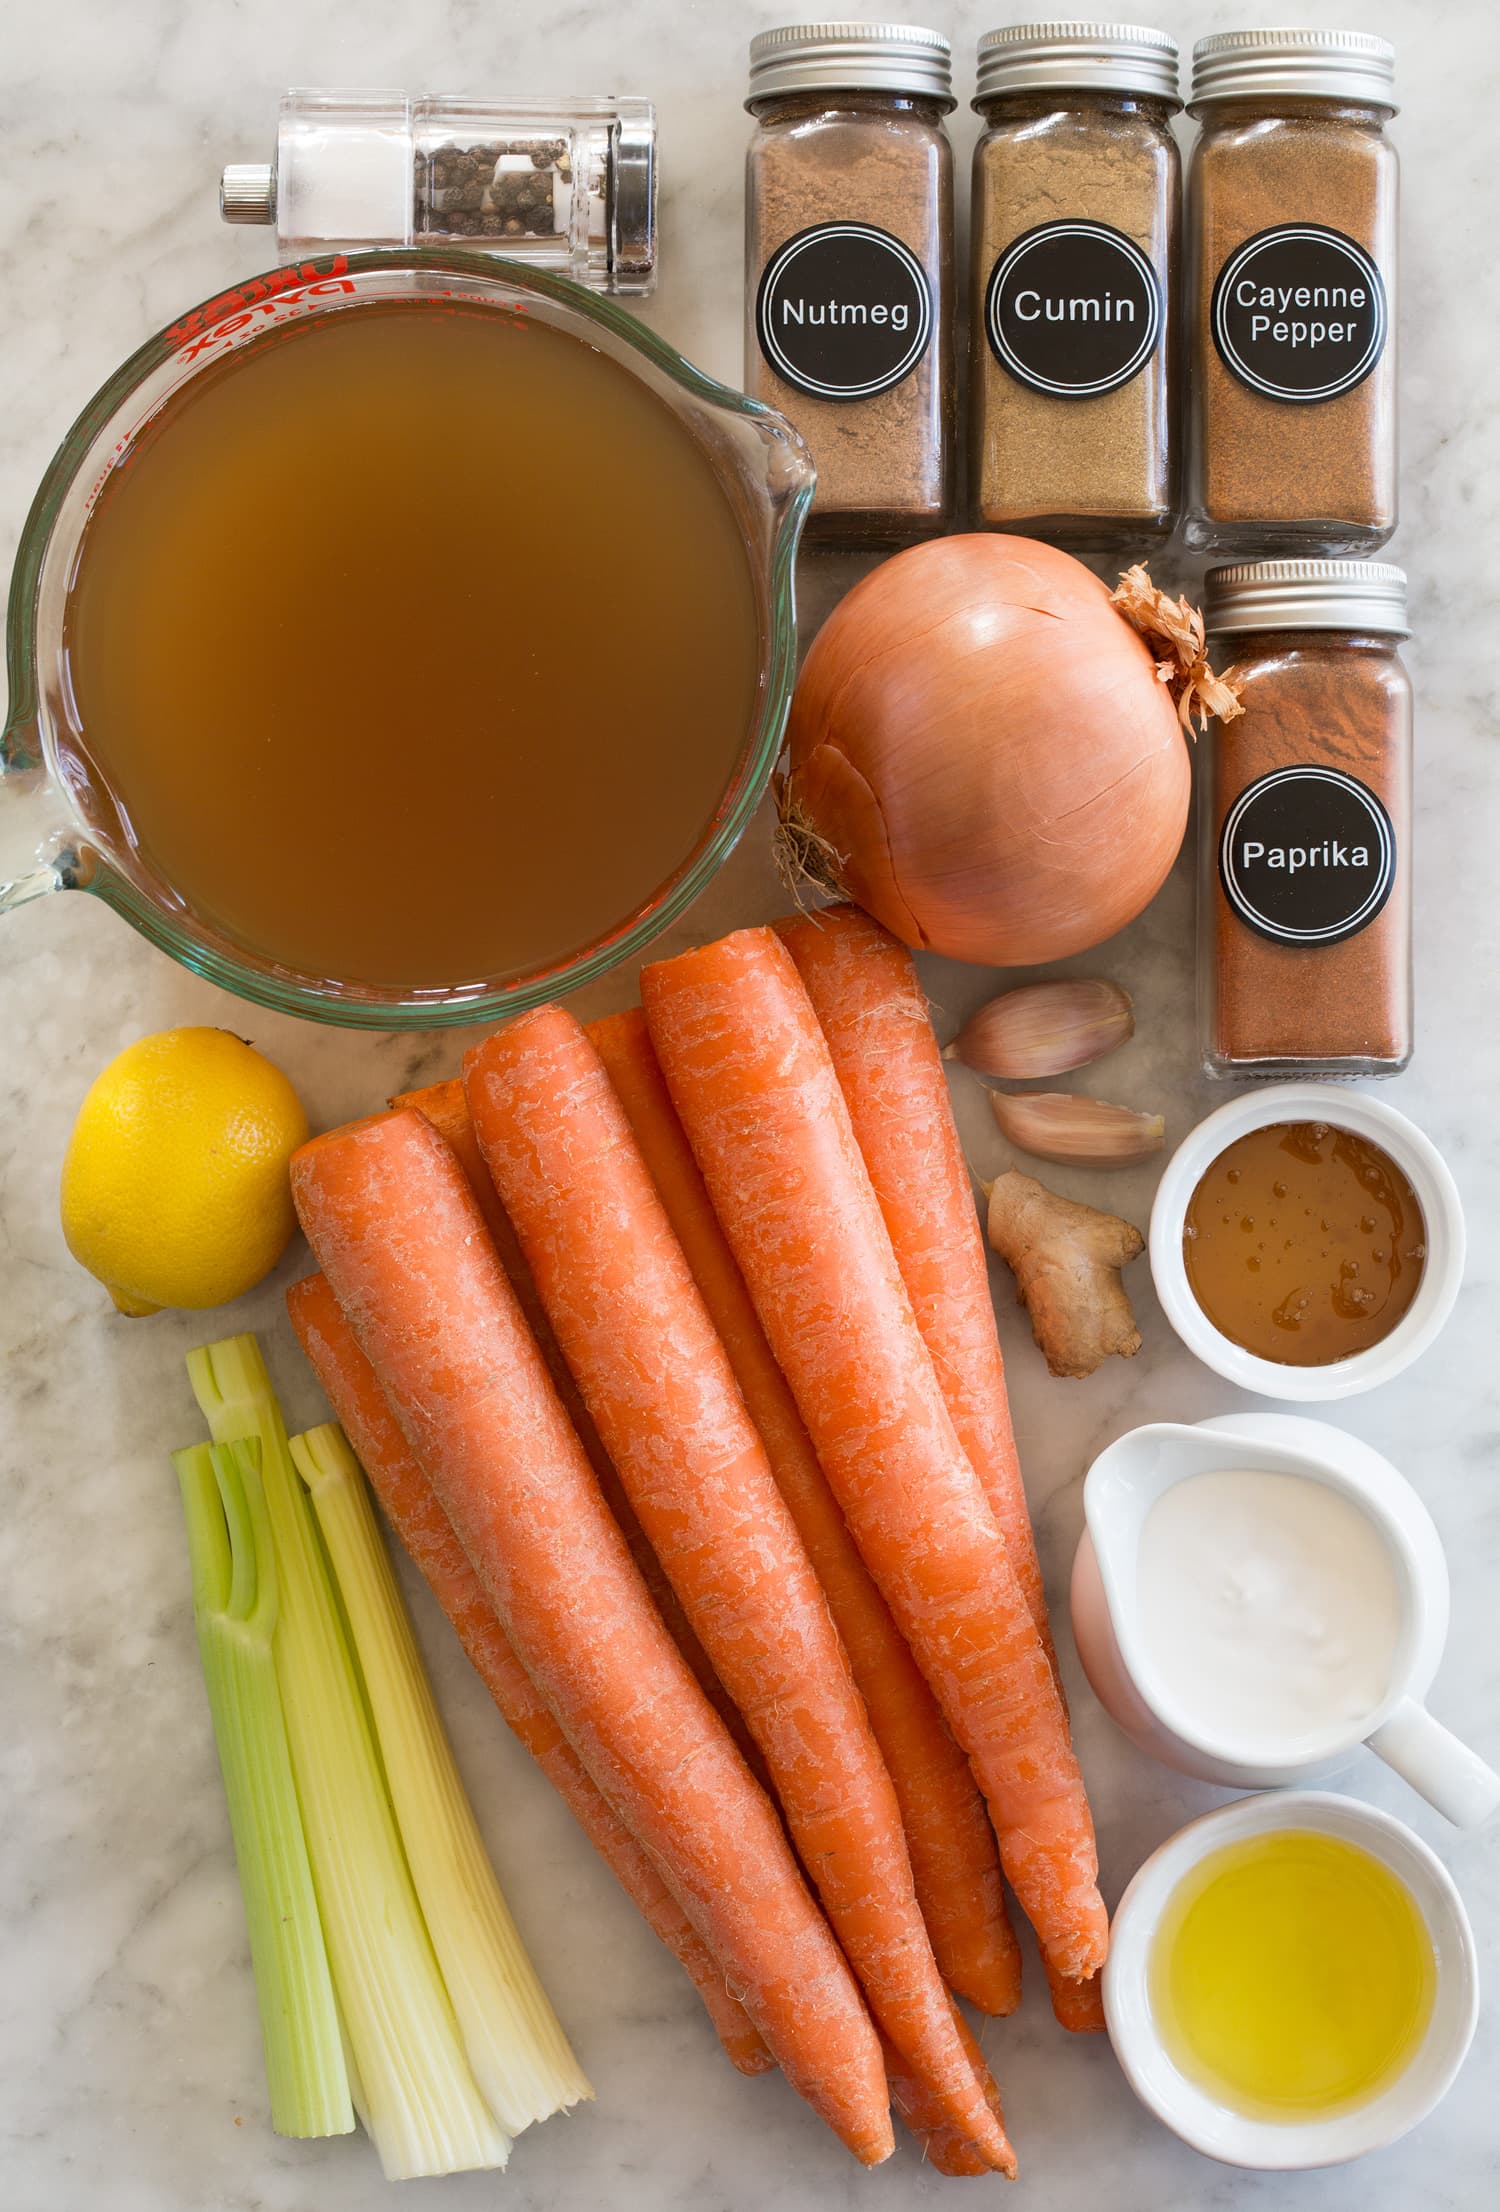 Carrot soup recipe ingredients shown.